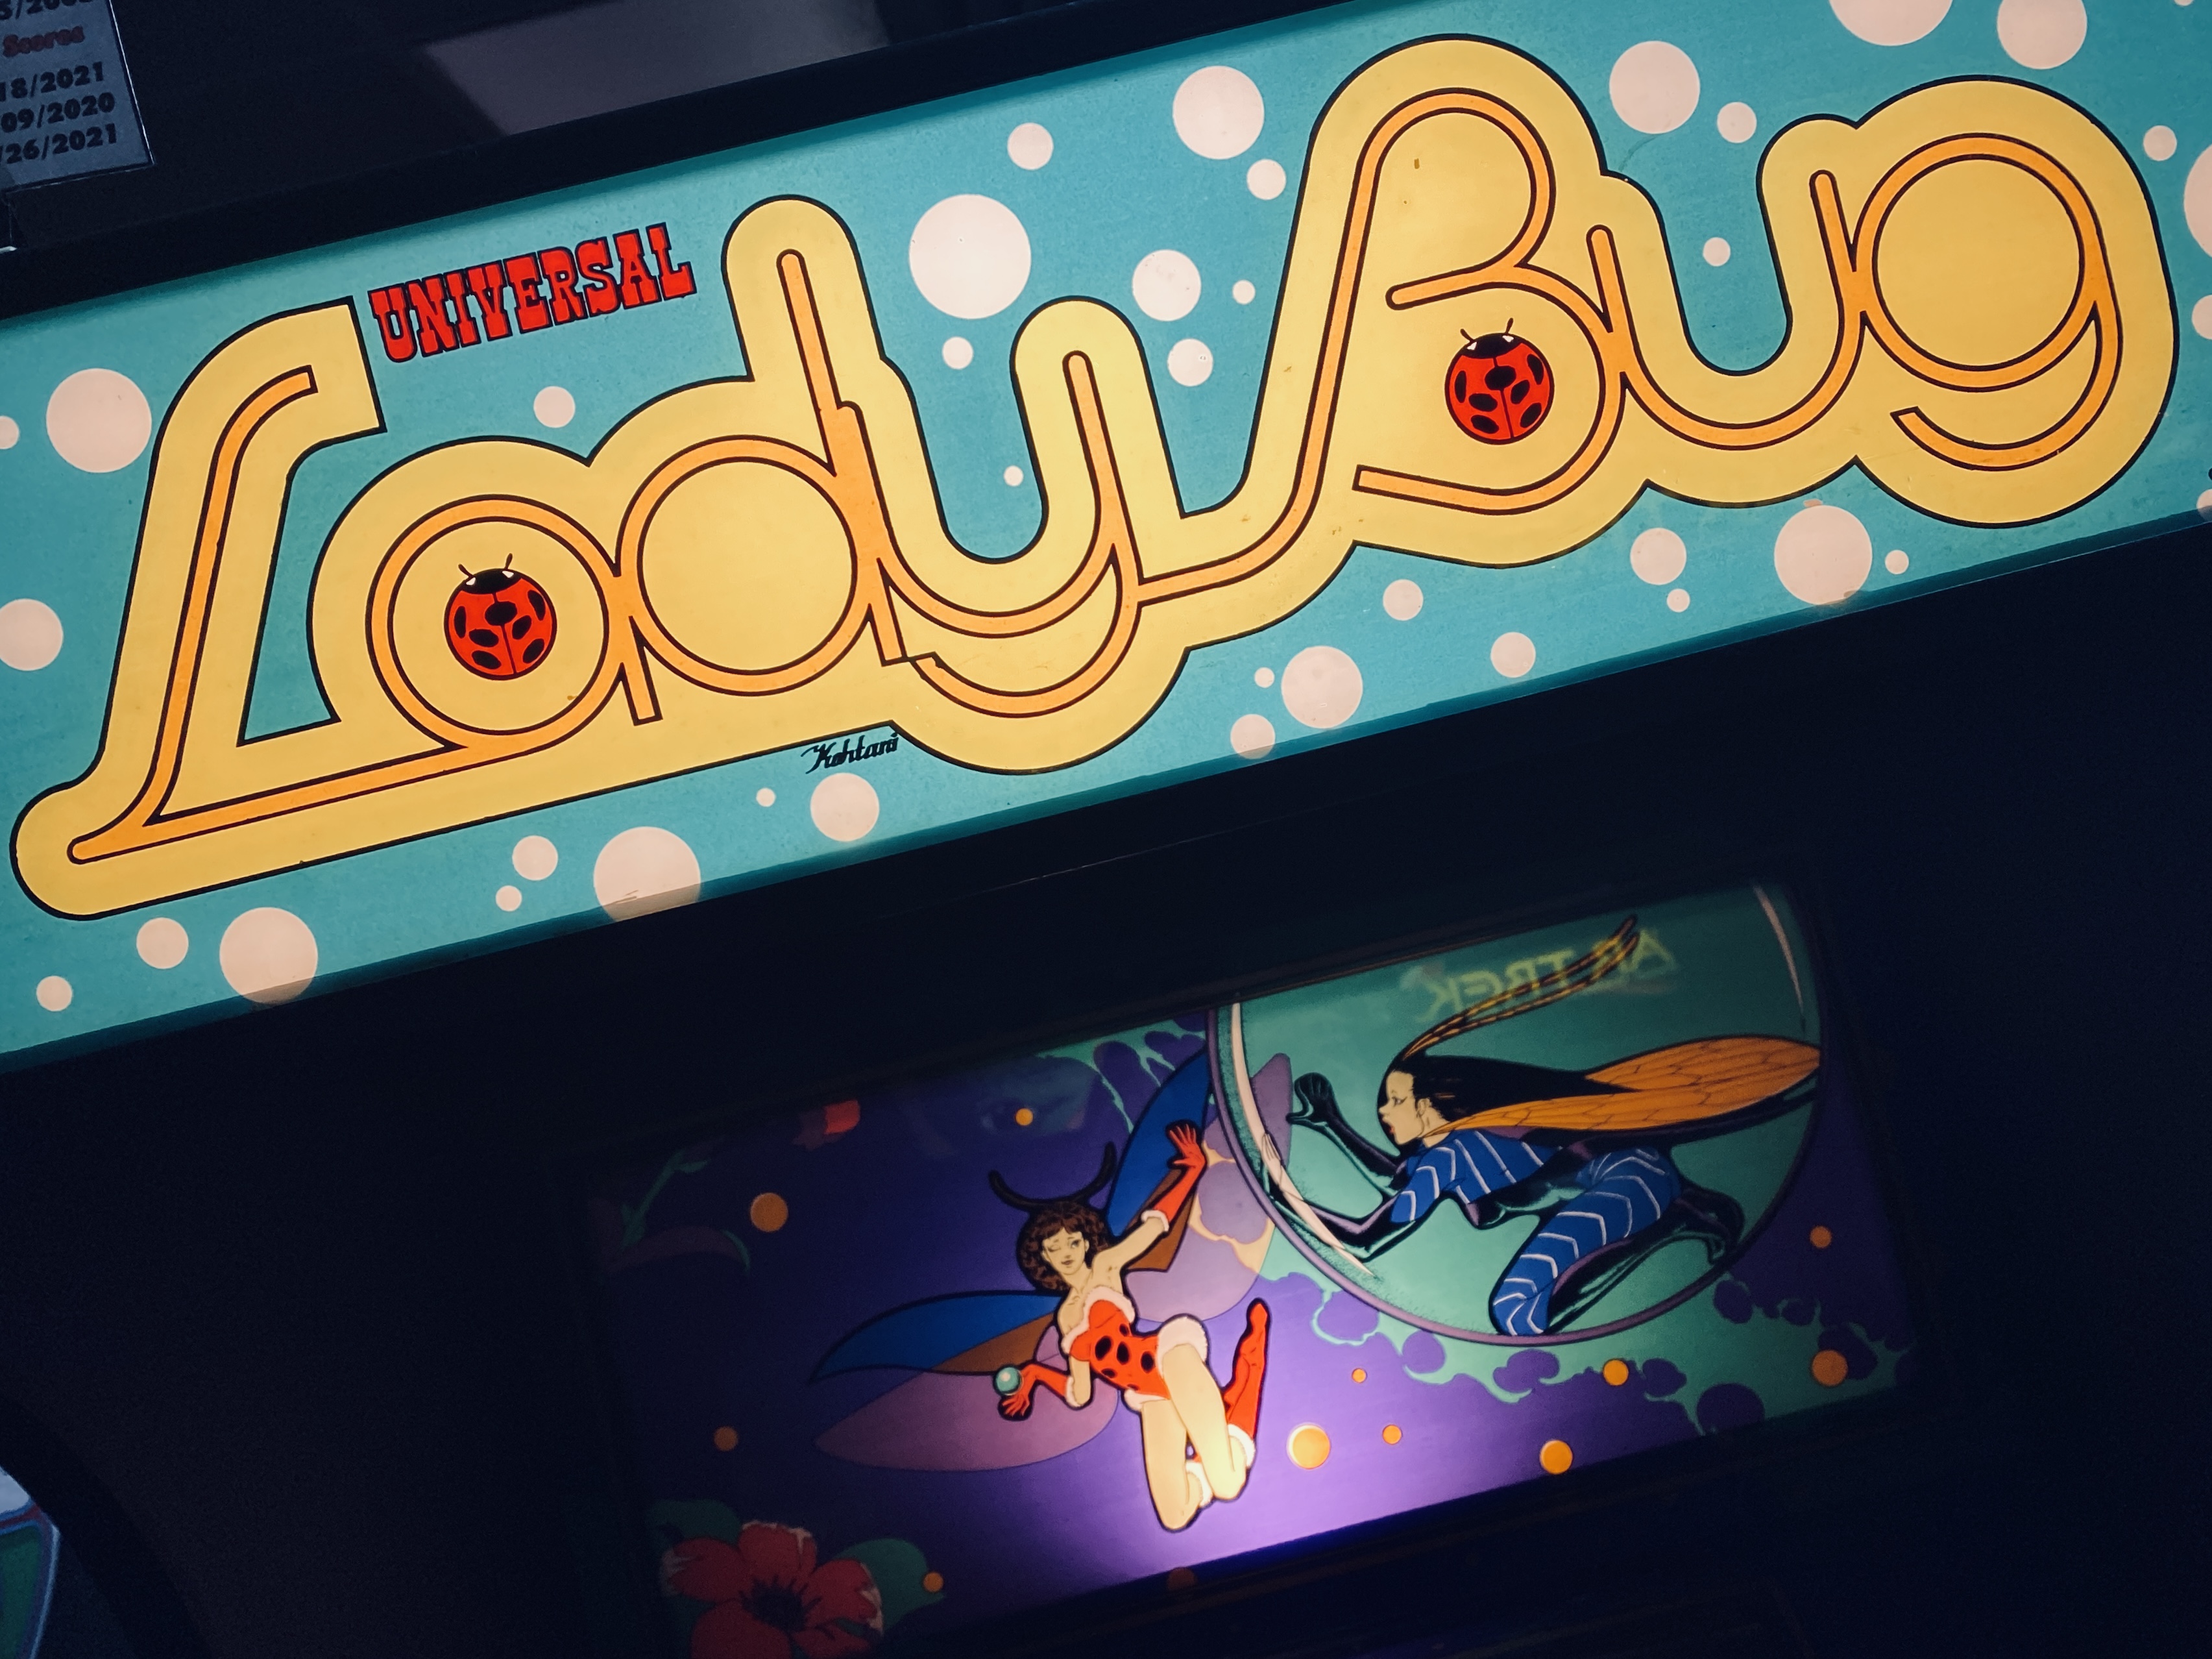 Detail on the title and main image from the video game Lady Bug featuring  two women wearing stylized insect-themed costumes